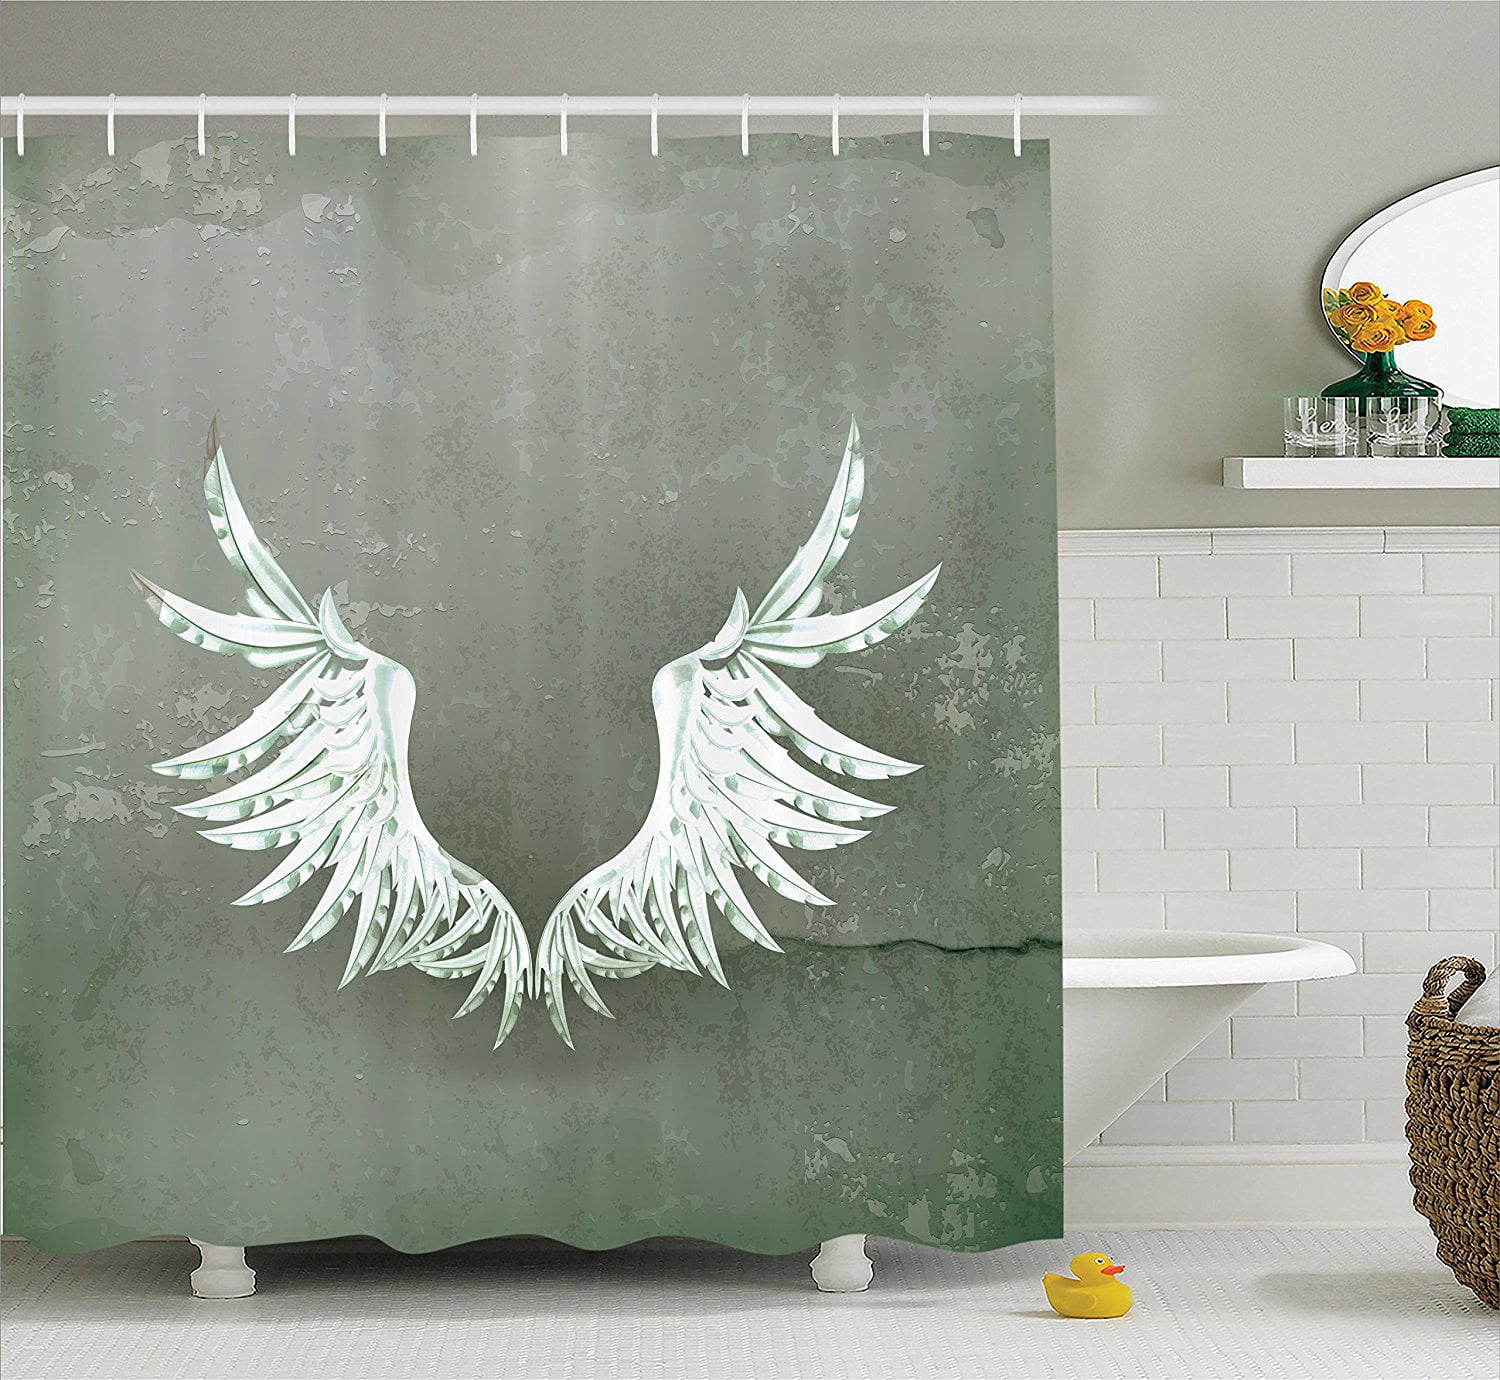 Details about   Clock Shower Curtain Concrete Wall Design Print for Bathroom 